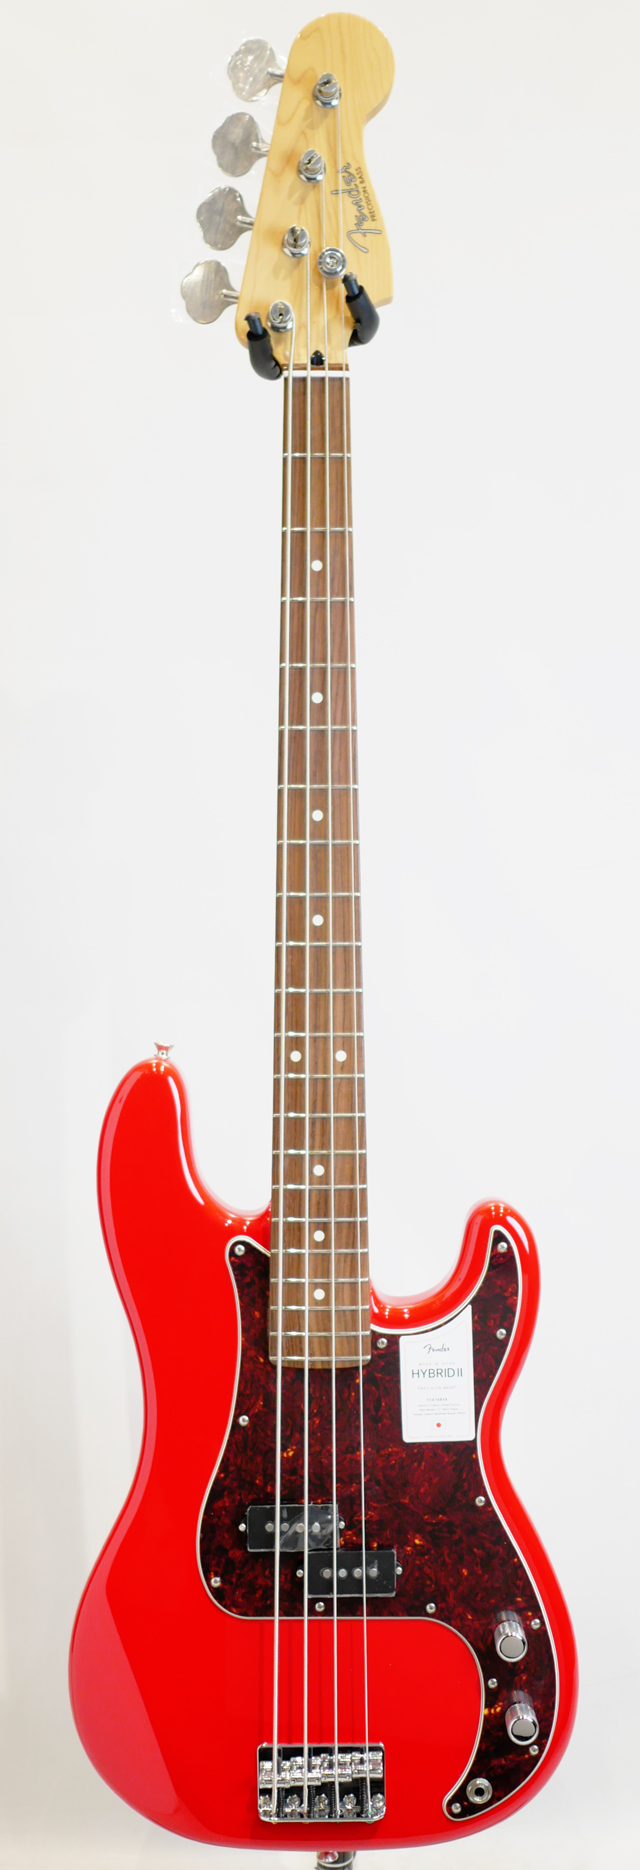 FENDER MADE IN JAPAN HYBRID II PRECISION BASS Modena Red フェンダー サブ画像2